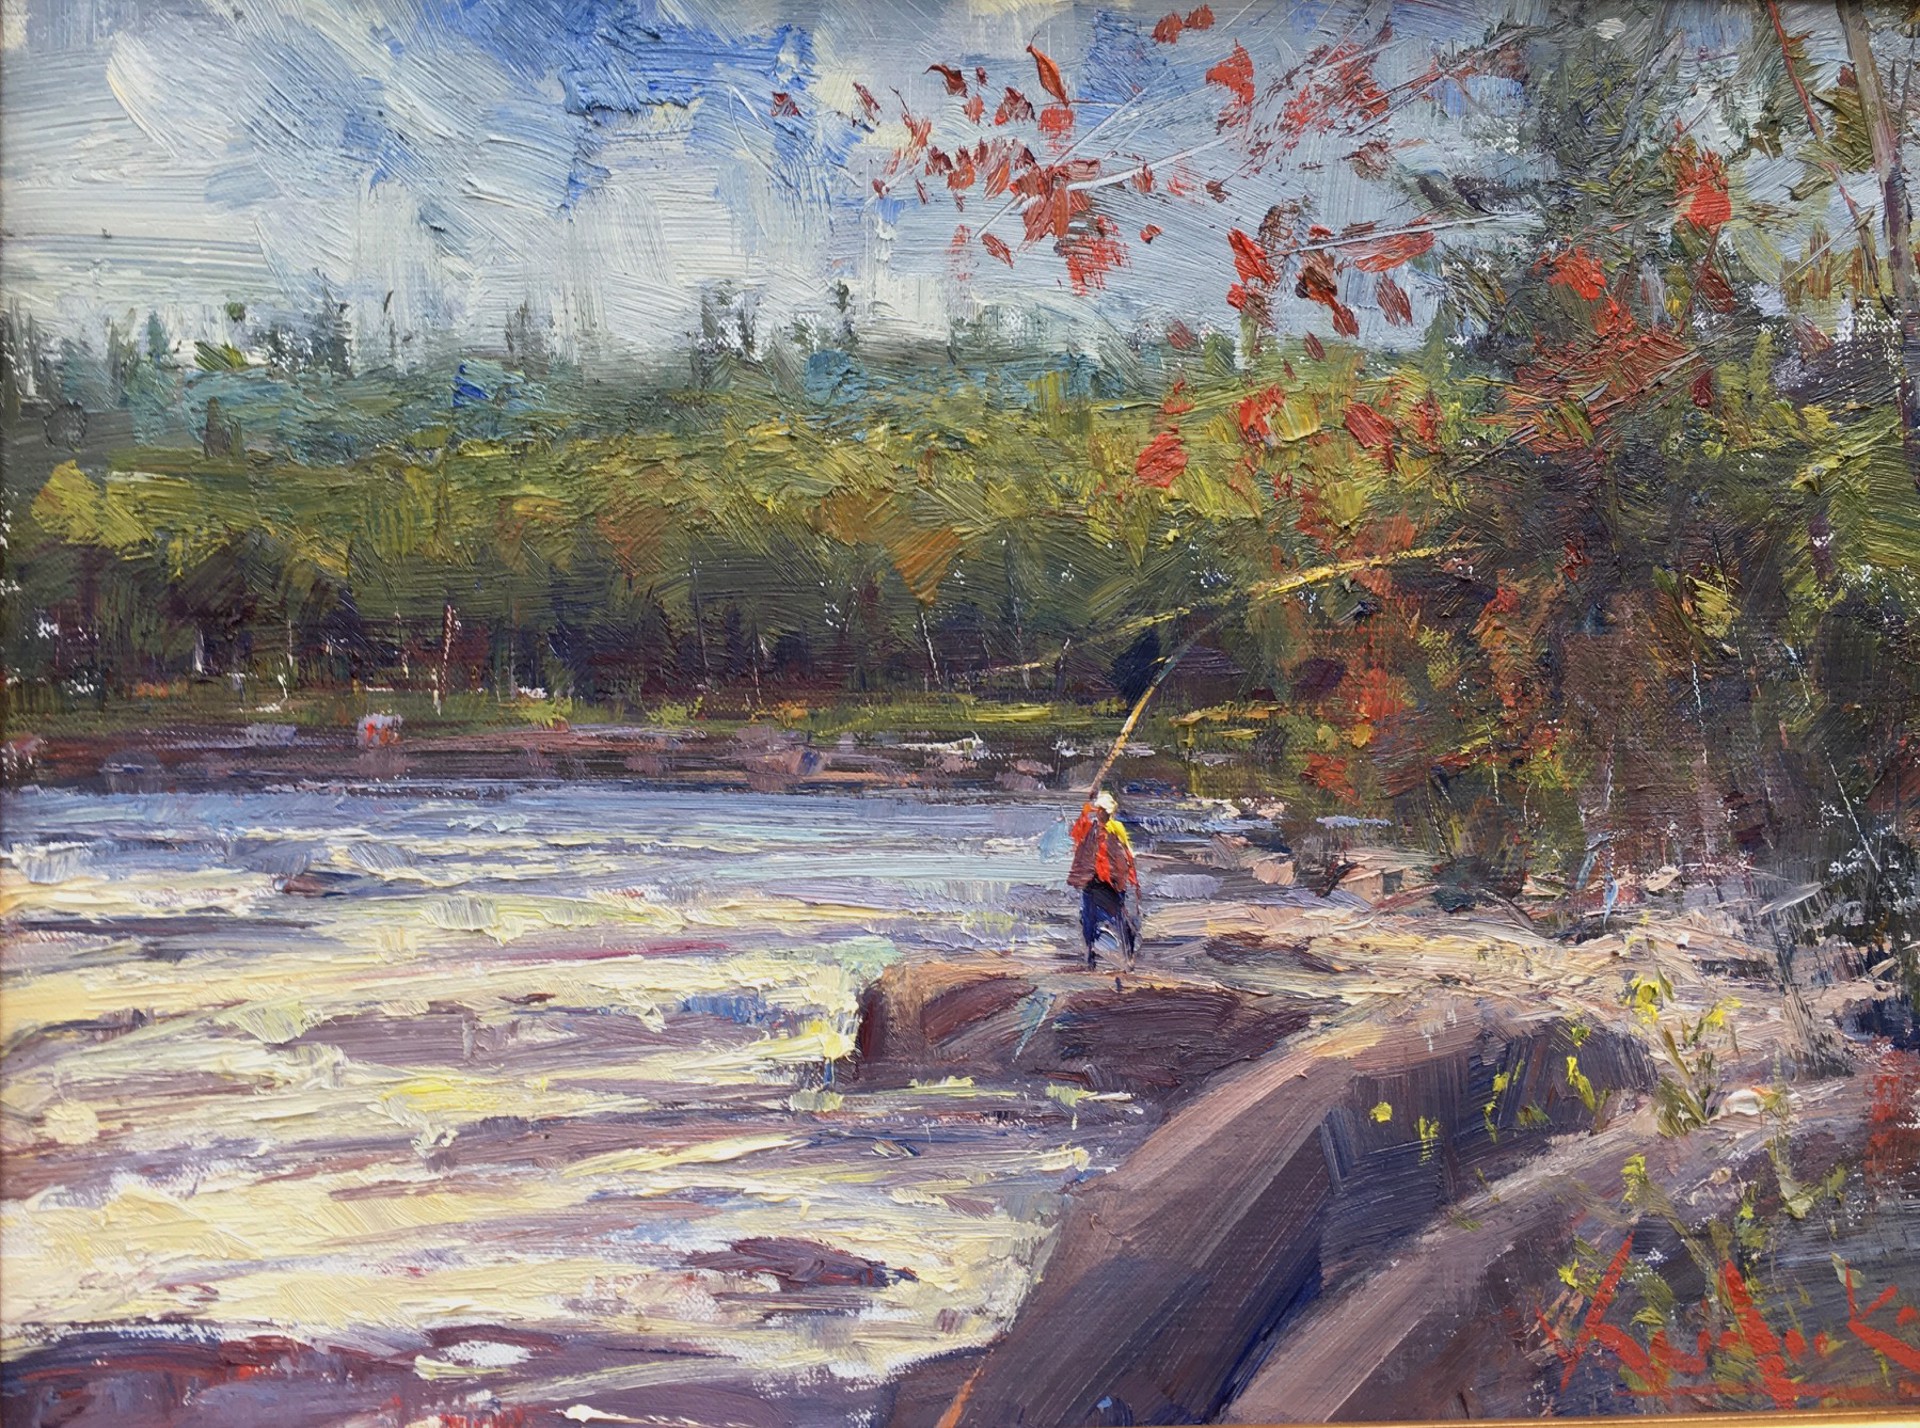 Fly Rod on the West Branch by George Van Hook